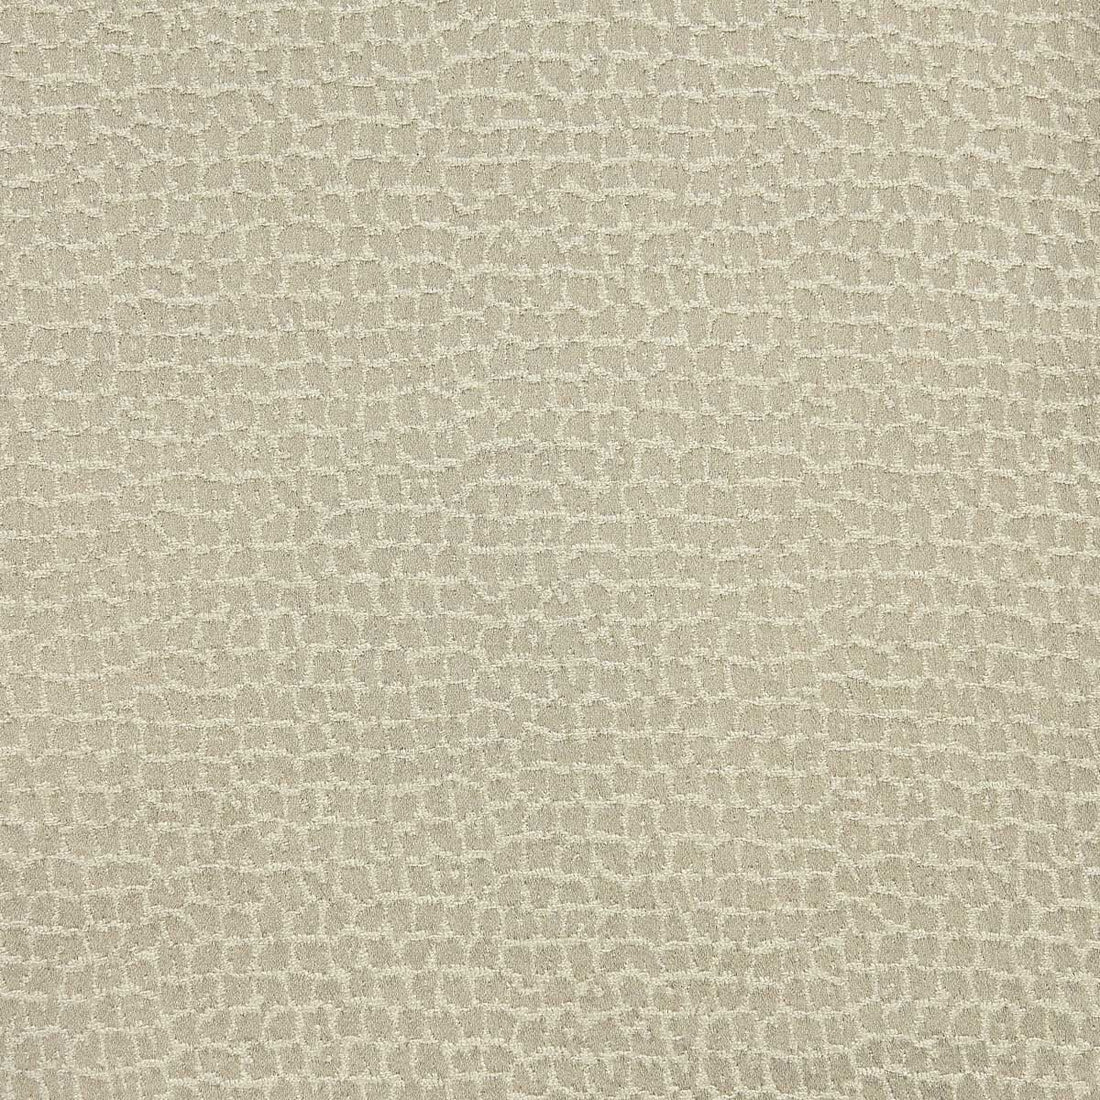 Gaudi fabric in 9 color - pattern LZ-30410.09.0 - by Kravet Couture in the Lizzo collection